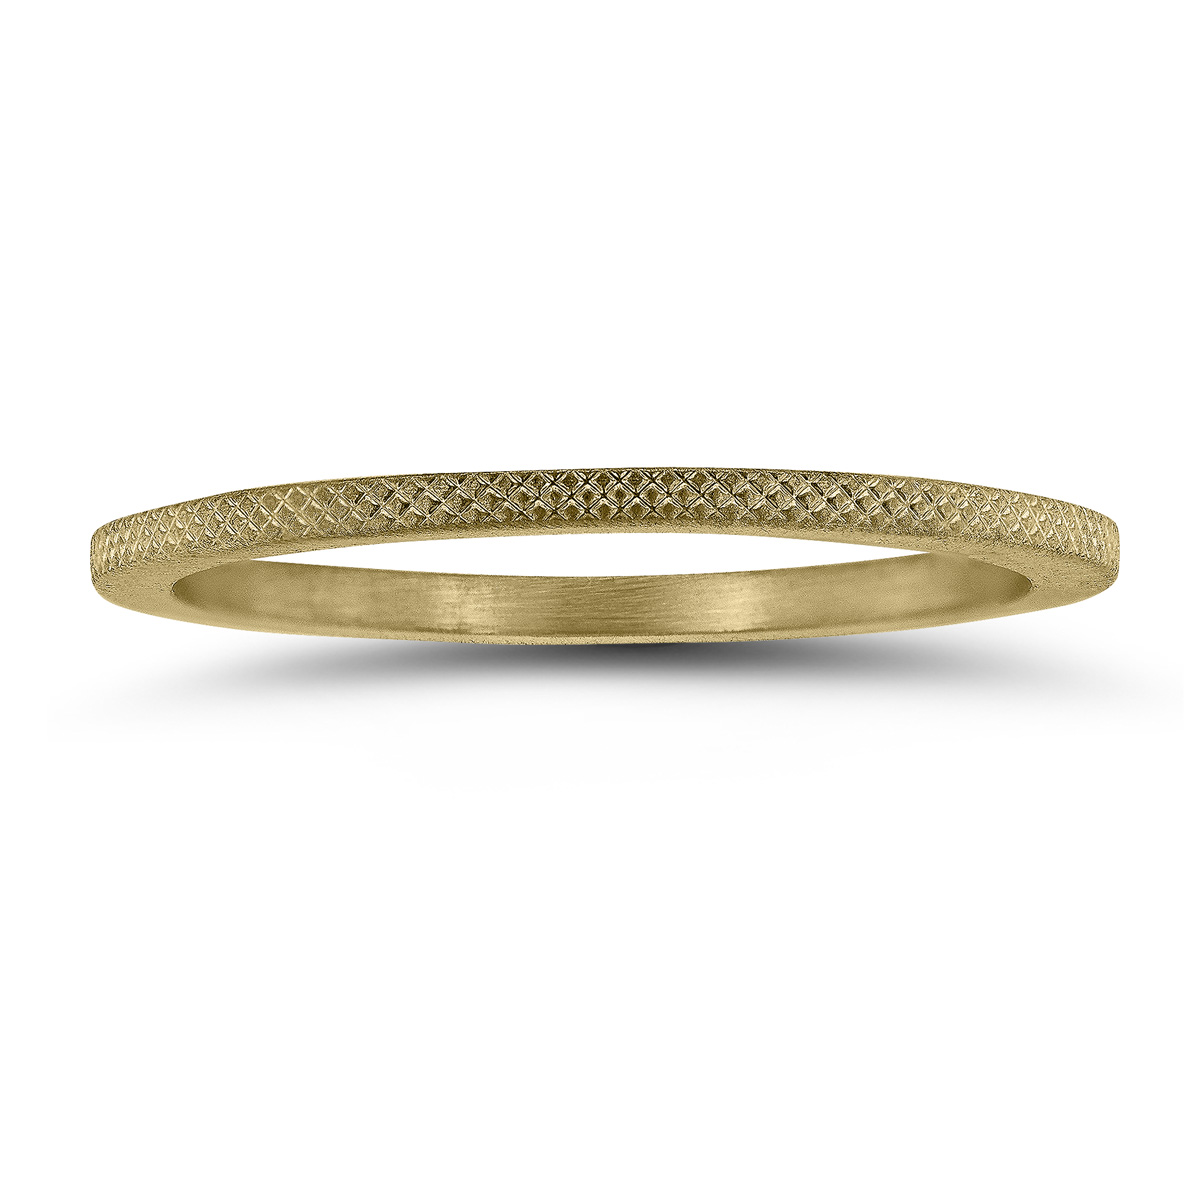 1MM Thin Wedding Band with Cross Hatch Center in 14K Yellow Gold